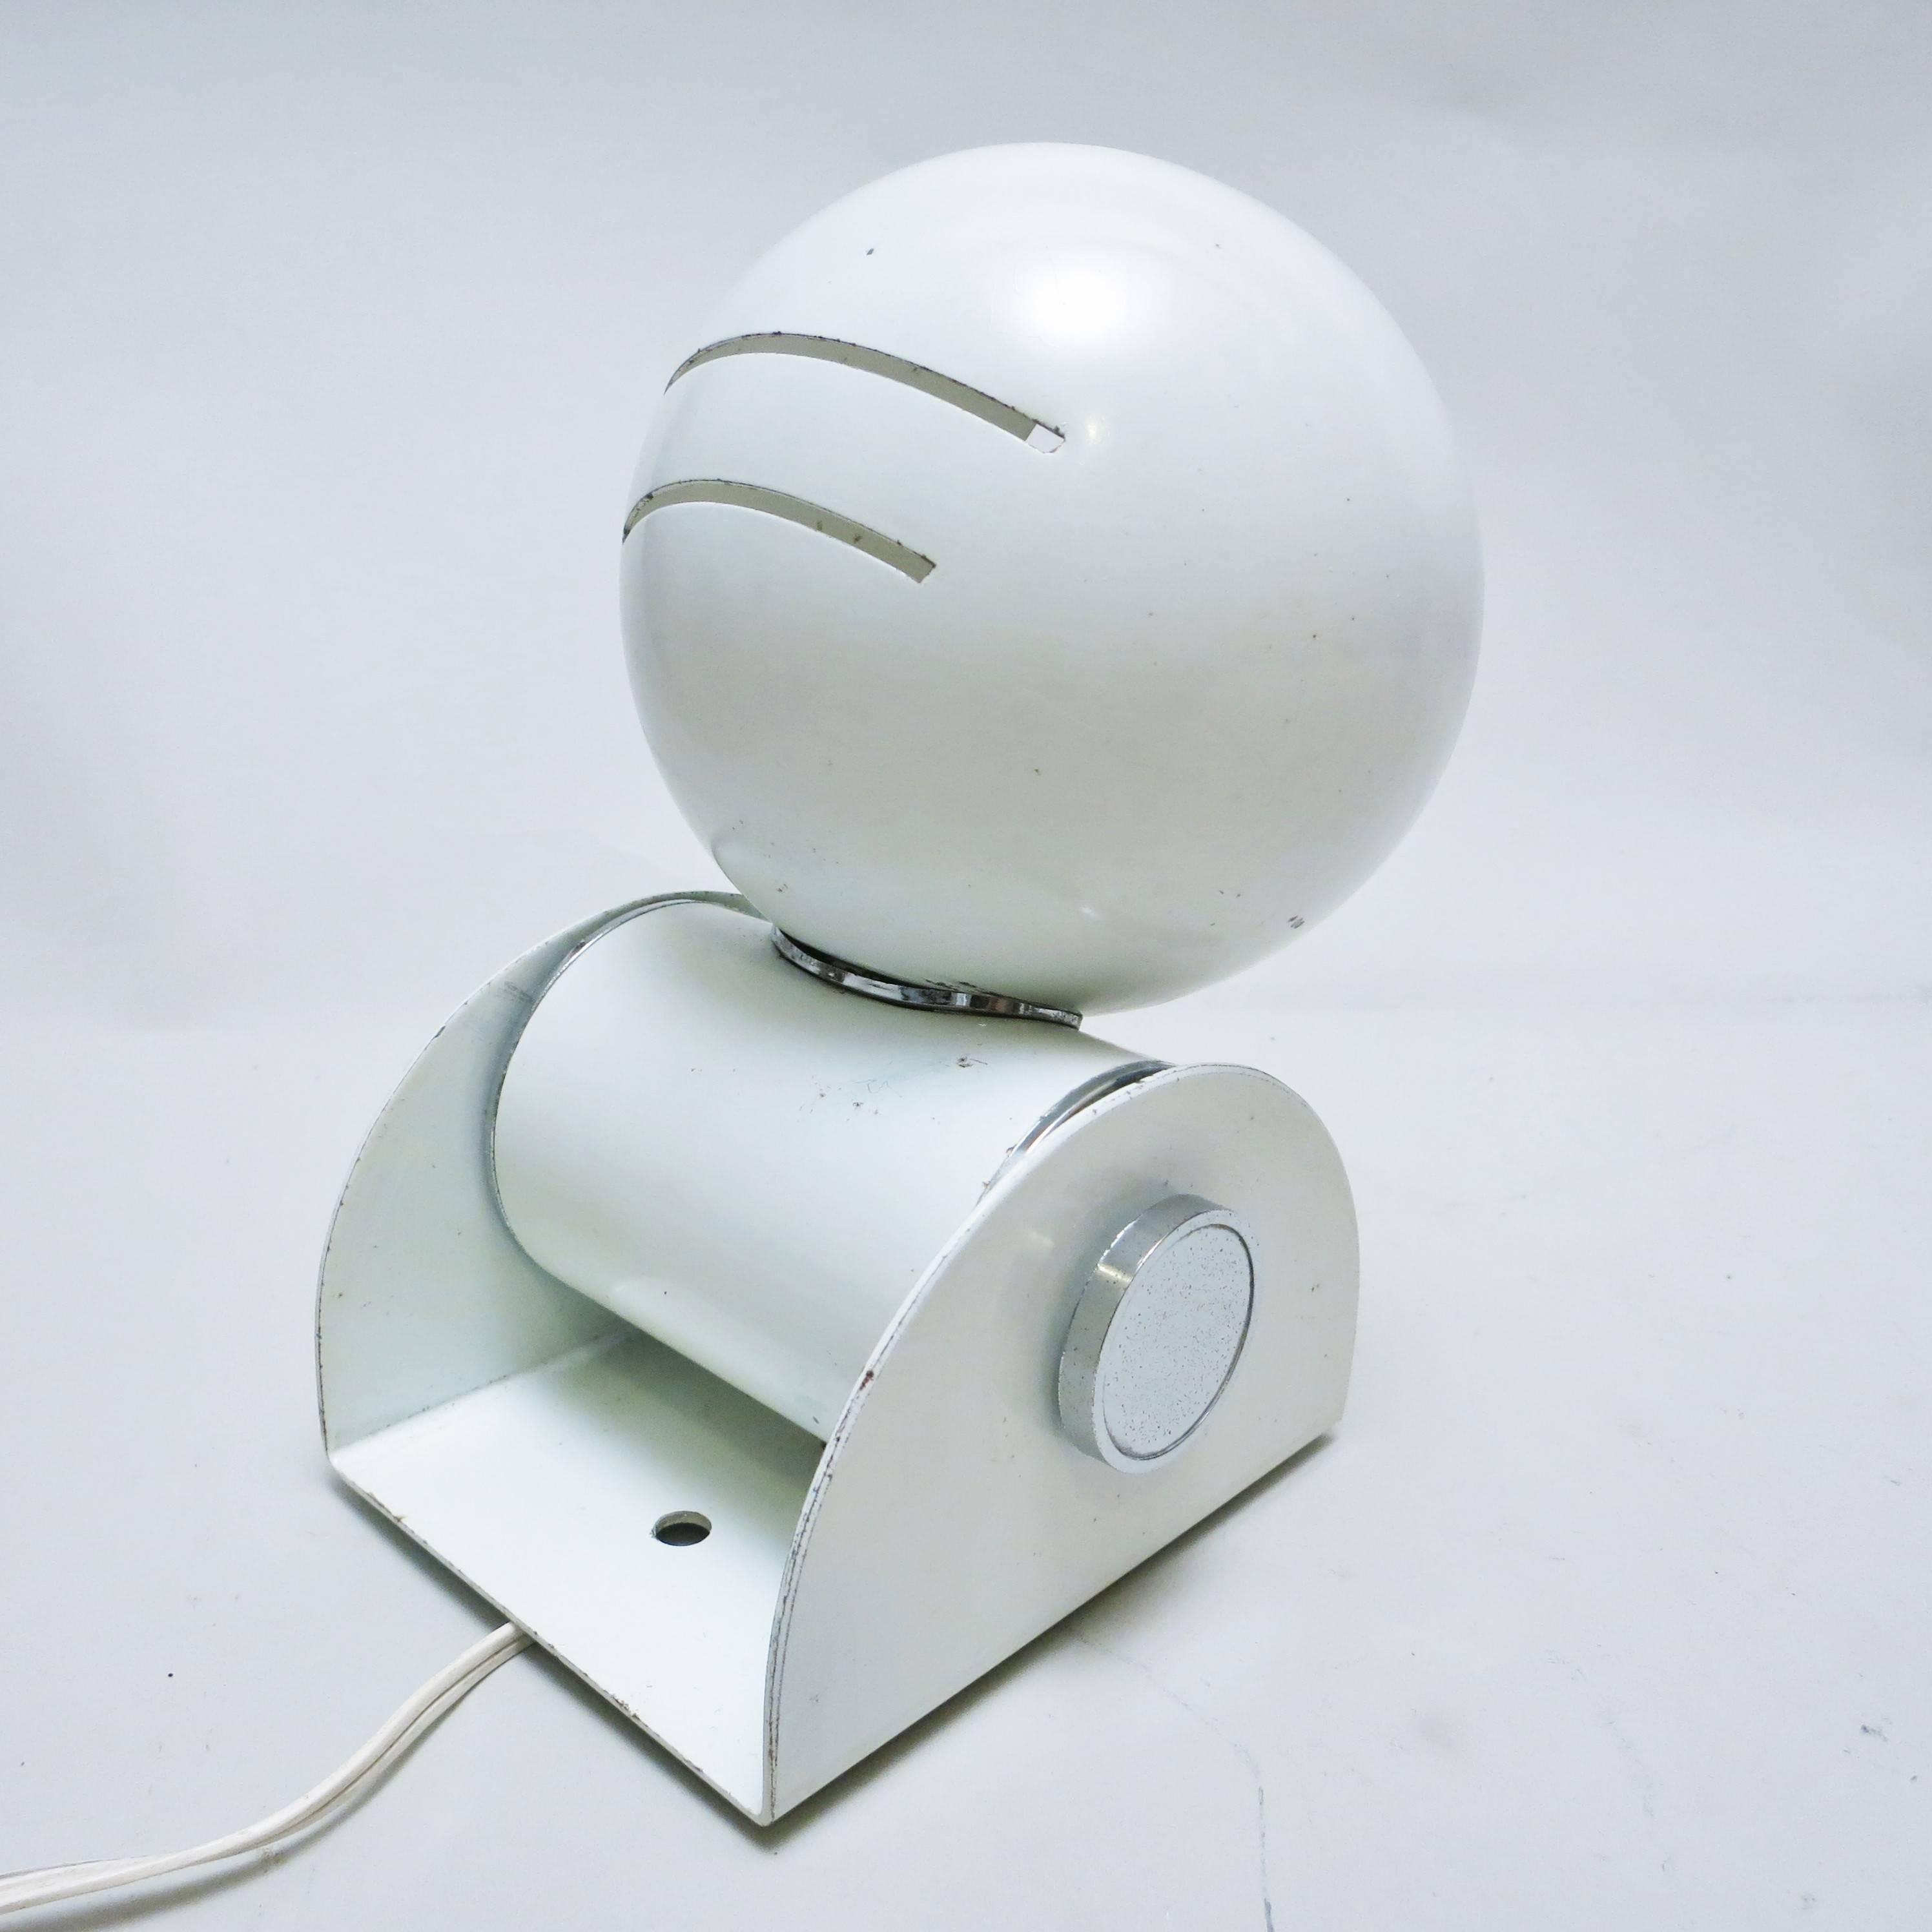 Little italian lamp of the 1960s designed and produced by Enrico Tronconi circa 1968. The ball shade is orientable. The lamp can be used as table lamp or as wall lamp